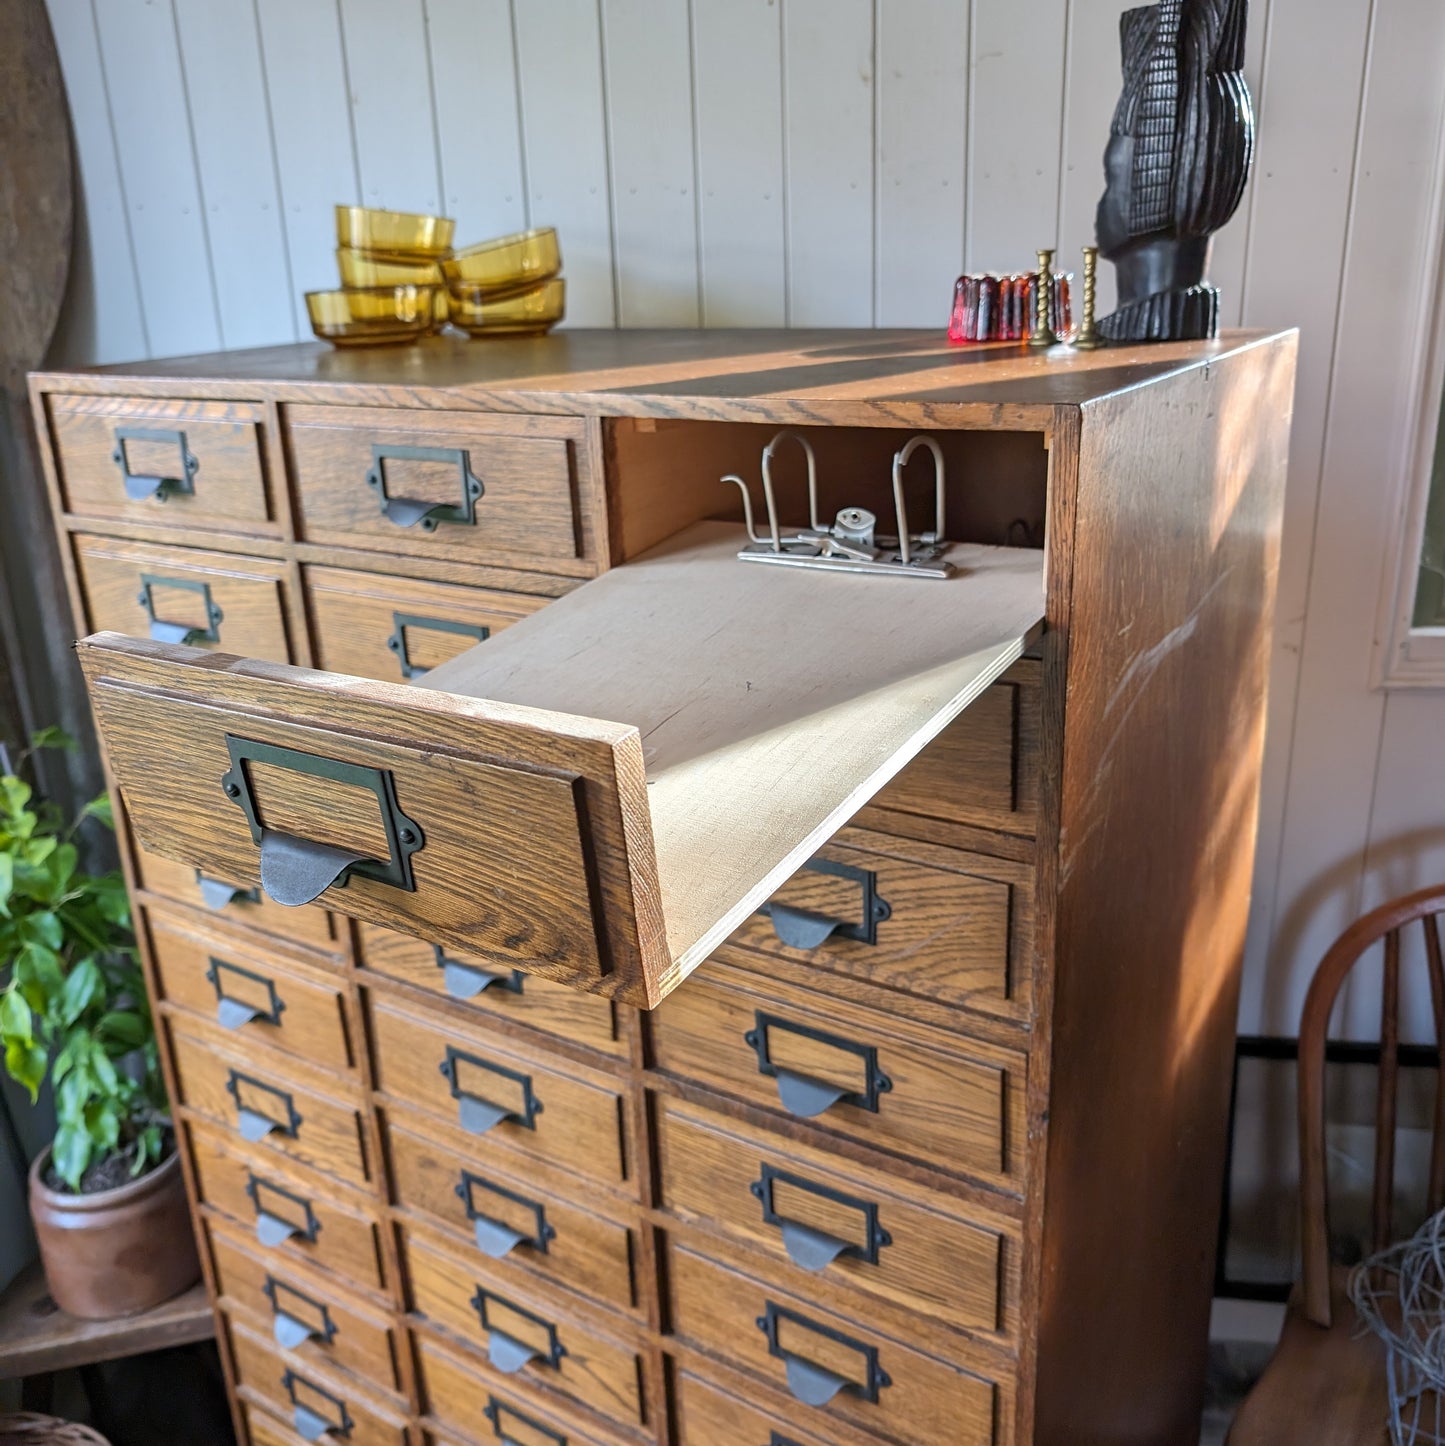 Antique Bank of Drawers